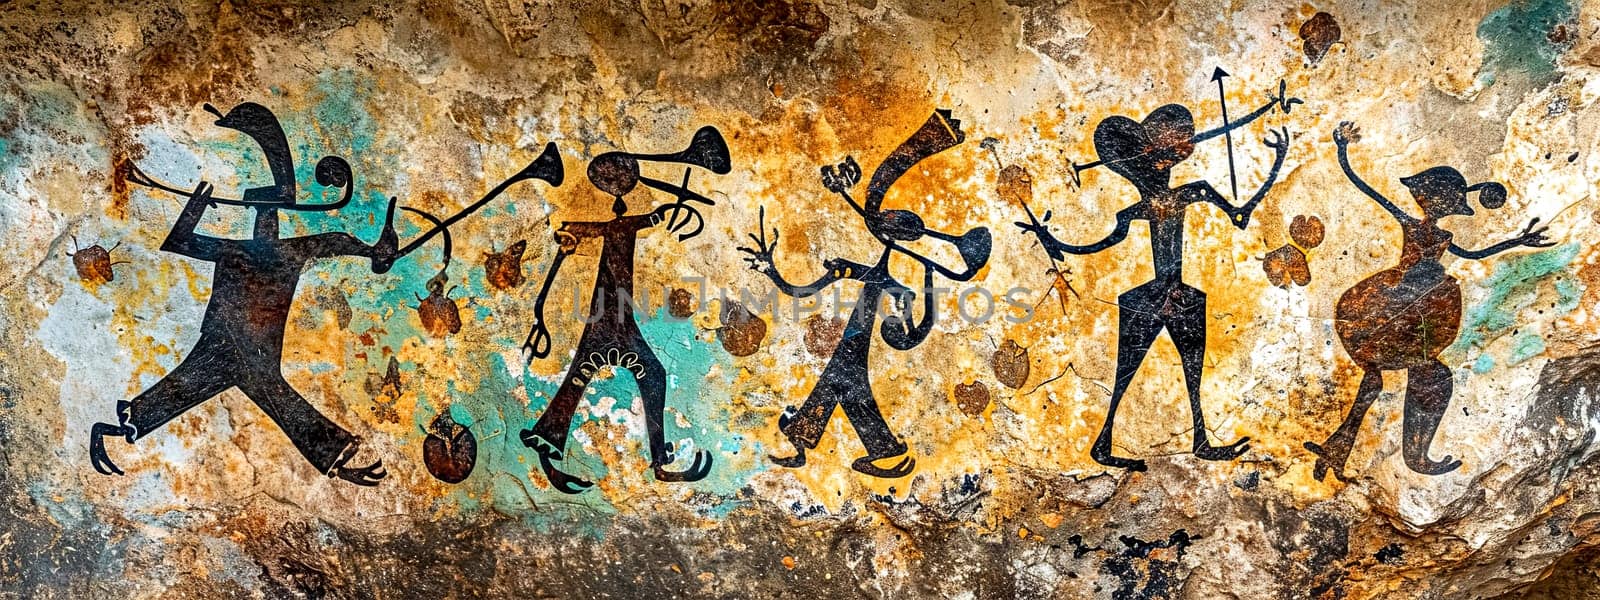 musicians with instruments, resembling ancient cave paintings, set against a rugged, multicolored stone background